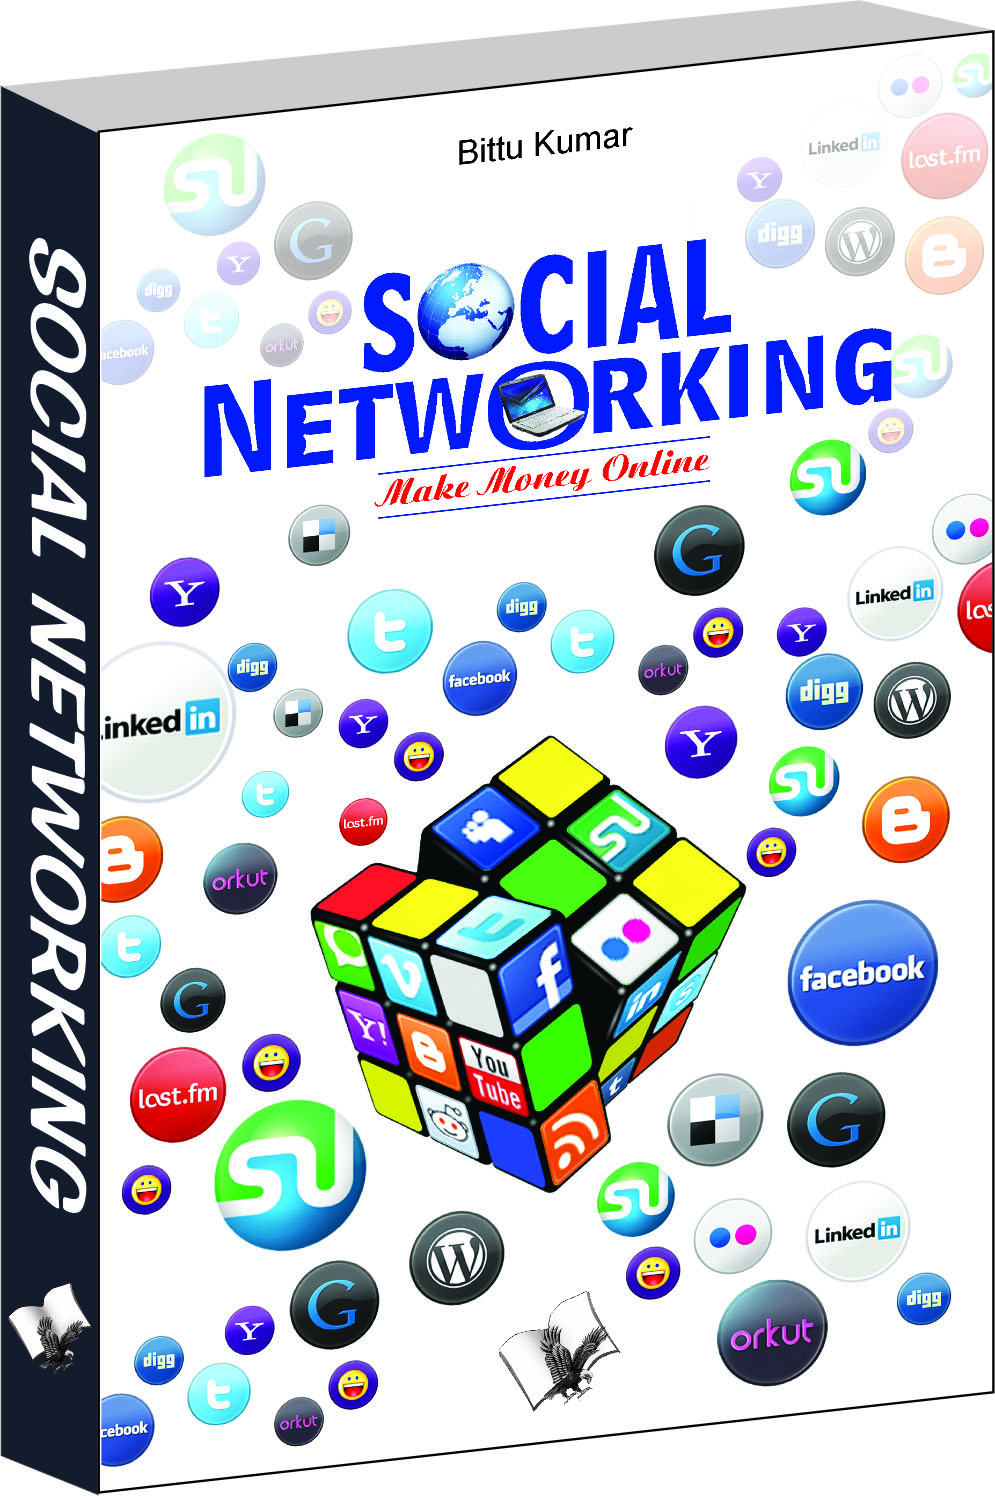 Social Networking-Important tips to establish social networking for business & pleasure